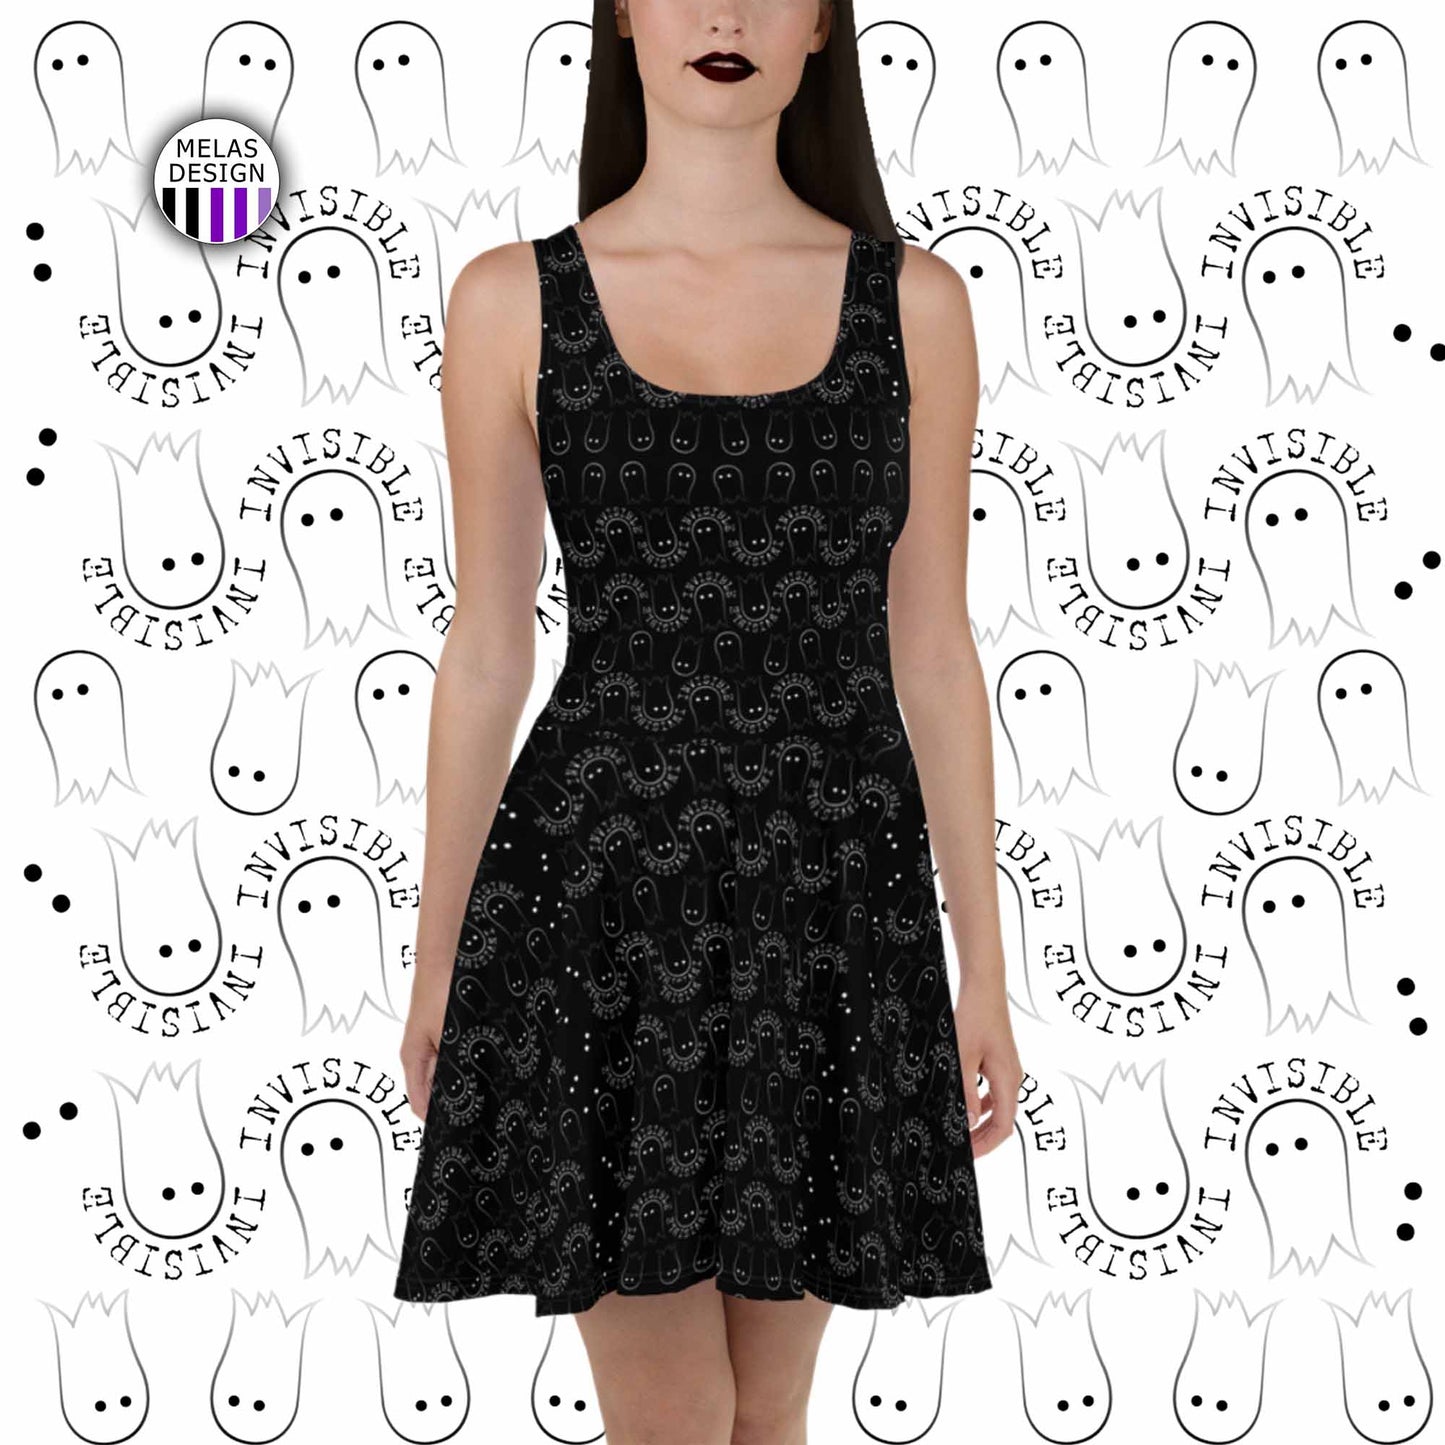 Invisible Ghost Emoji Skater Dress; gothic; witchy; clothes; Melasdesign Handmade; dress; skater; cute; paranormal; alternative; fashion; womens